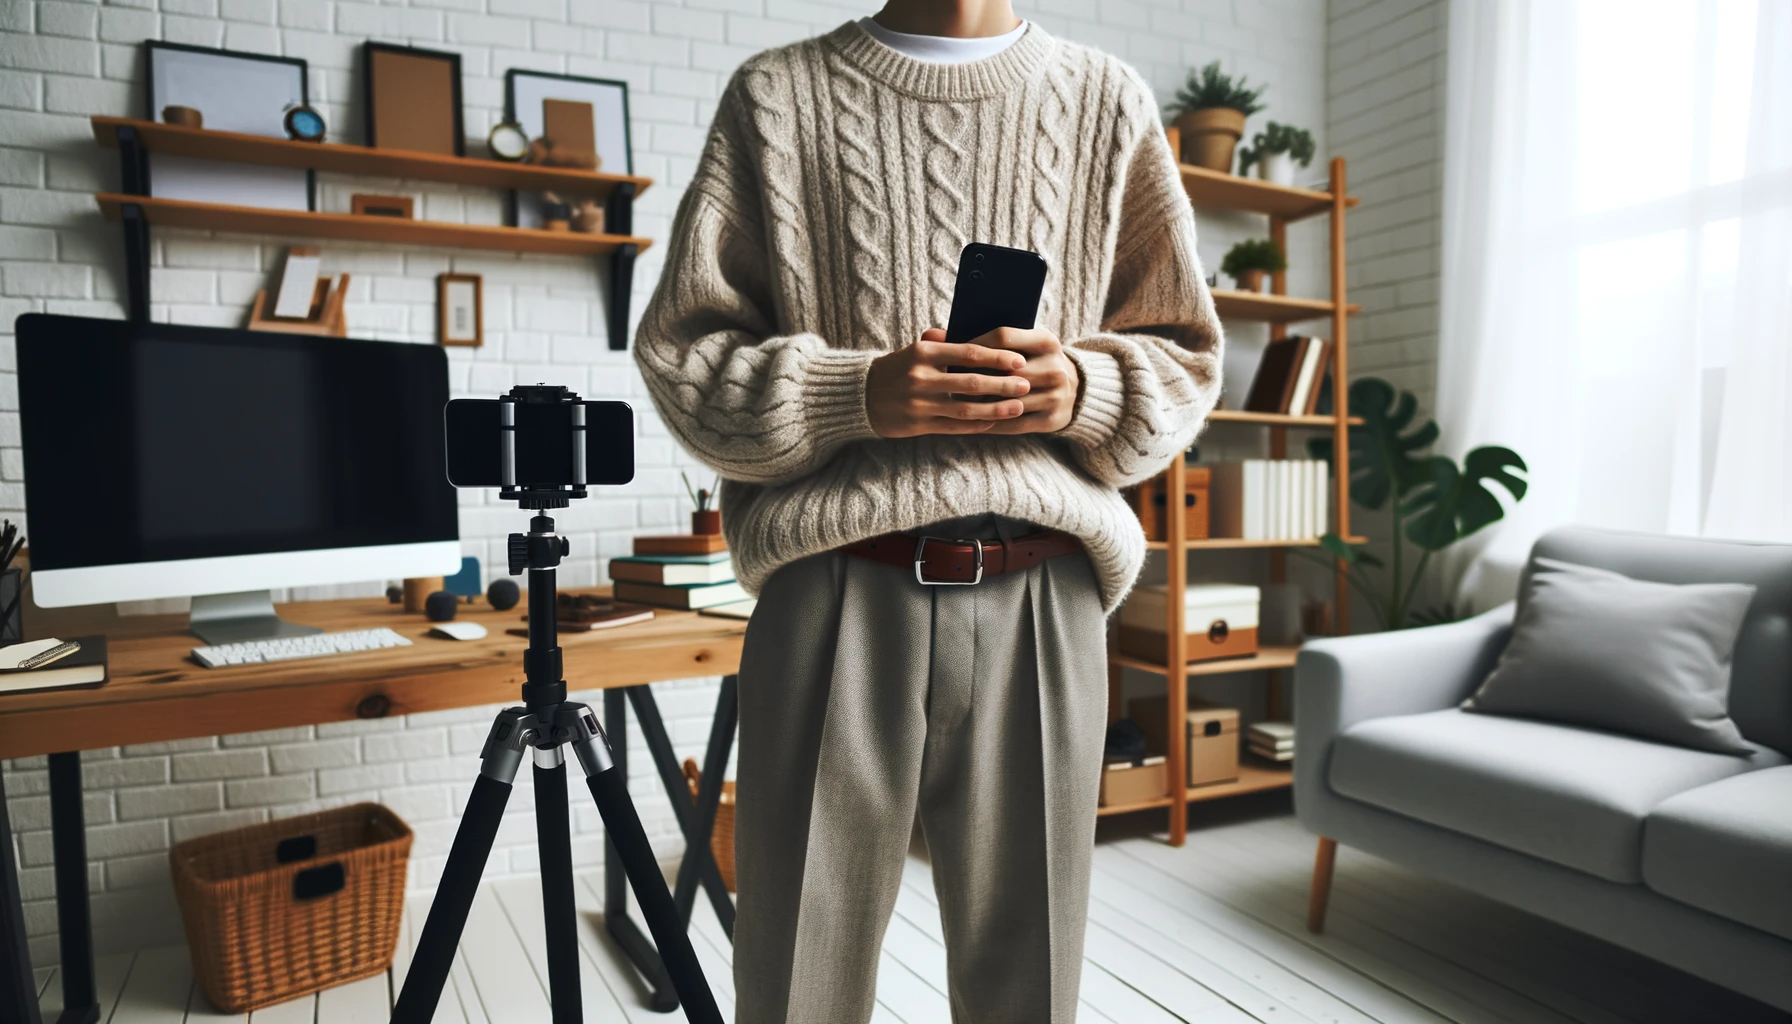 DALL·E 2023-10-18 20.15.01 - Photo consistent with the style and colors of the previous images, presenting an employee dressed in a cozy sweater and pants in a home office setting